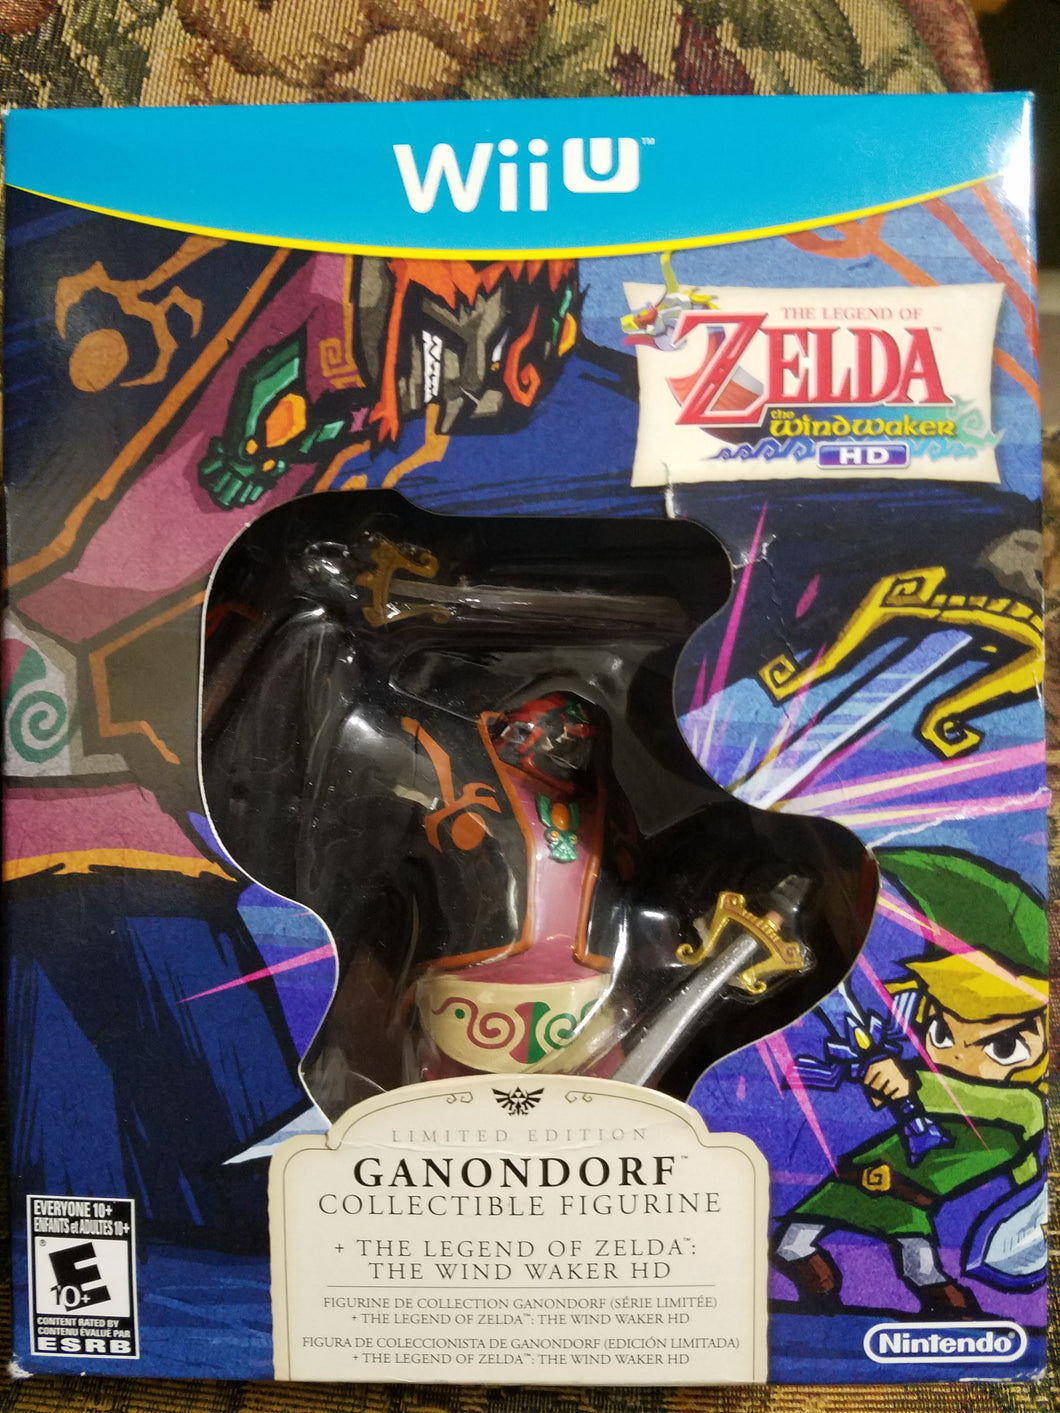 The Legend of Zelda The Windwaker HD Collector's edition for Wii U